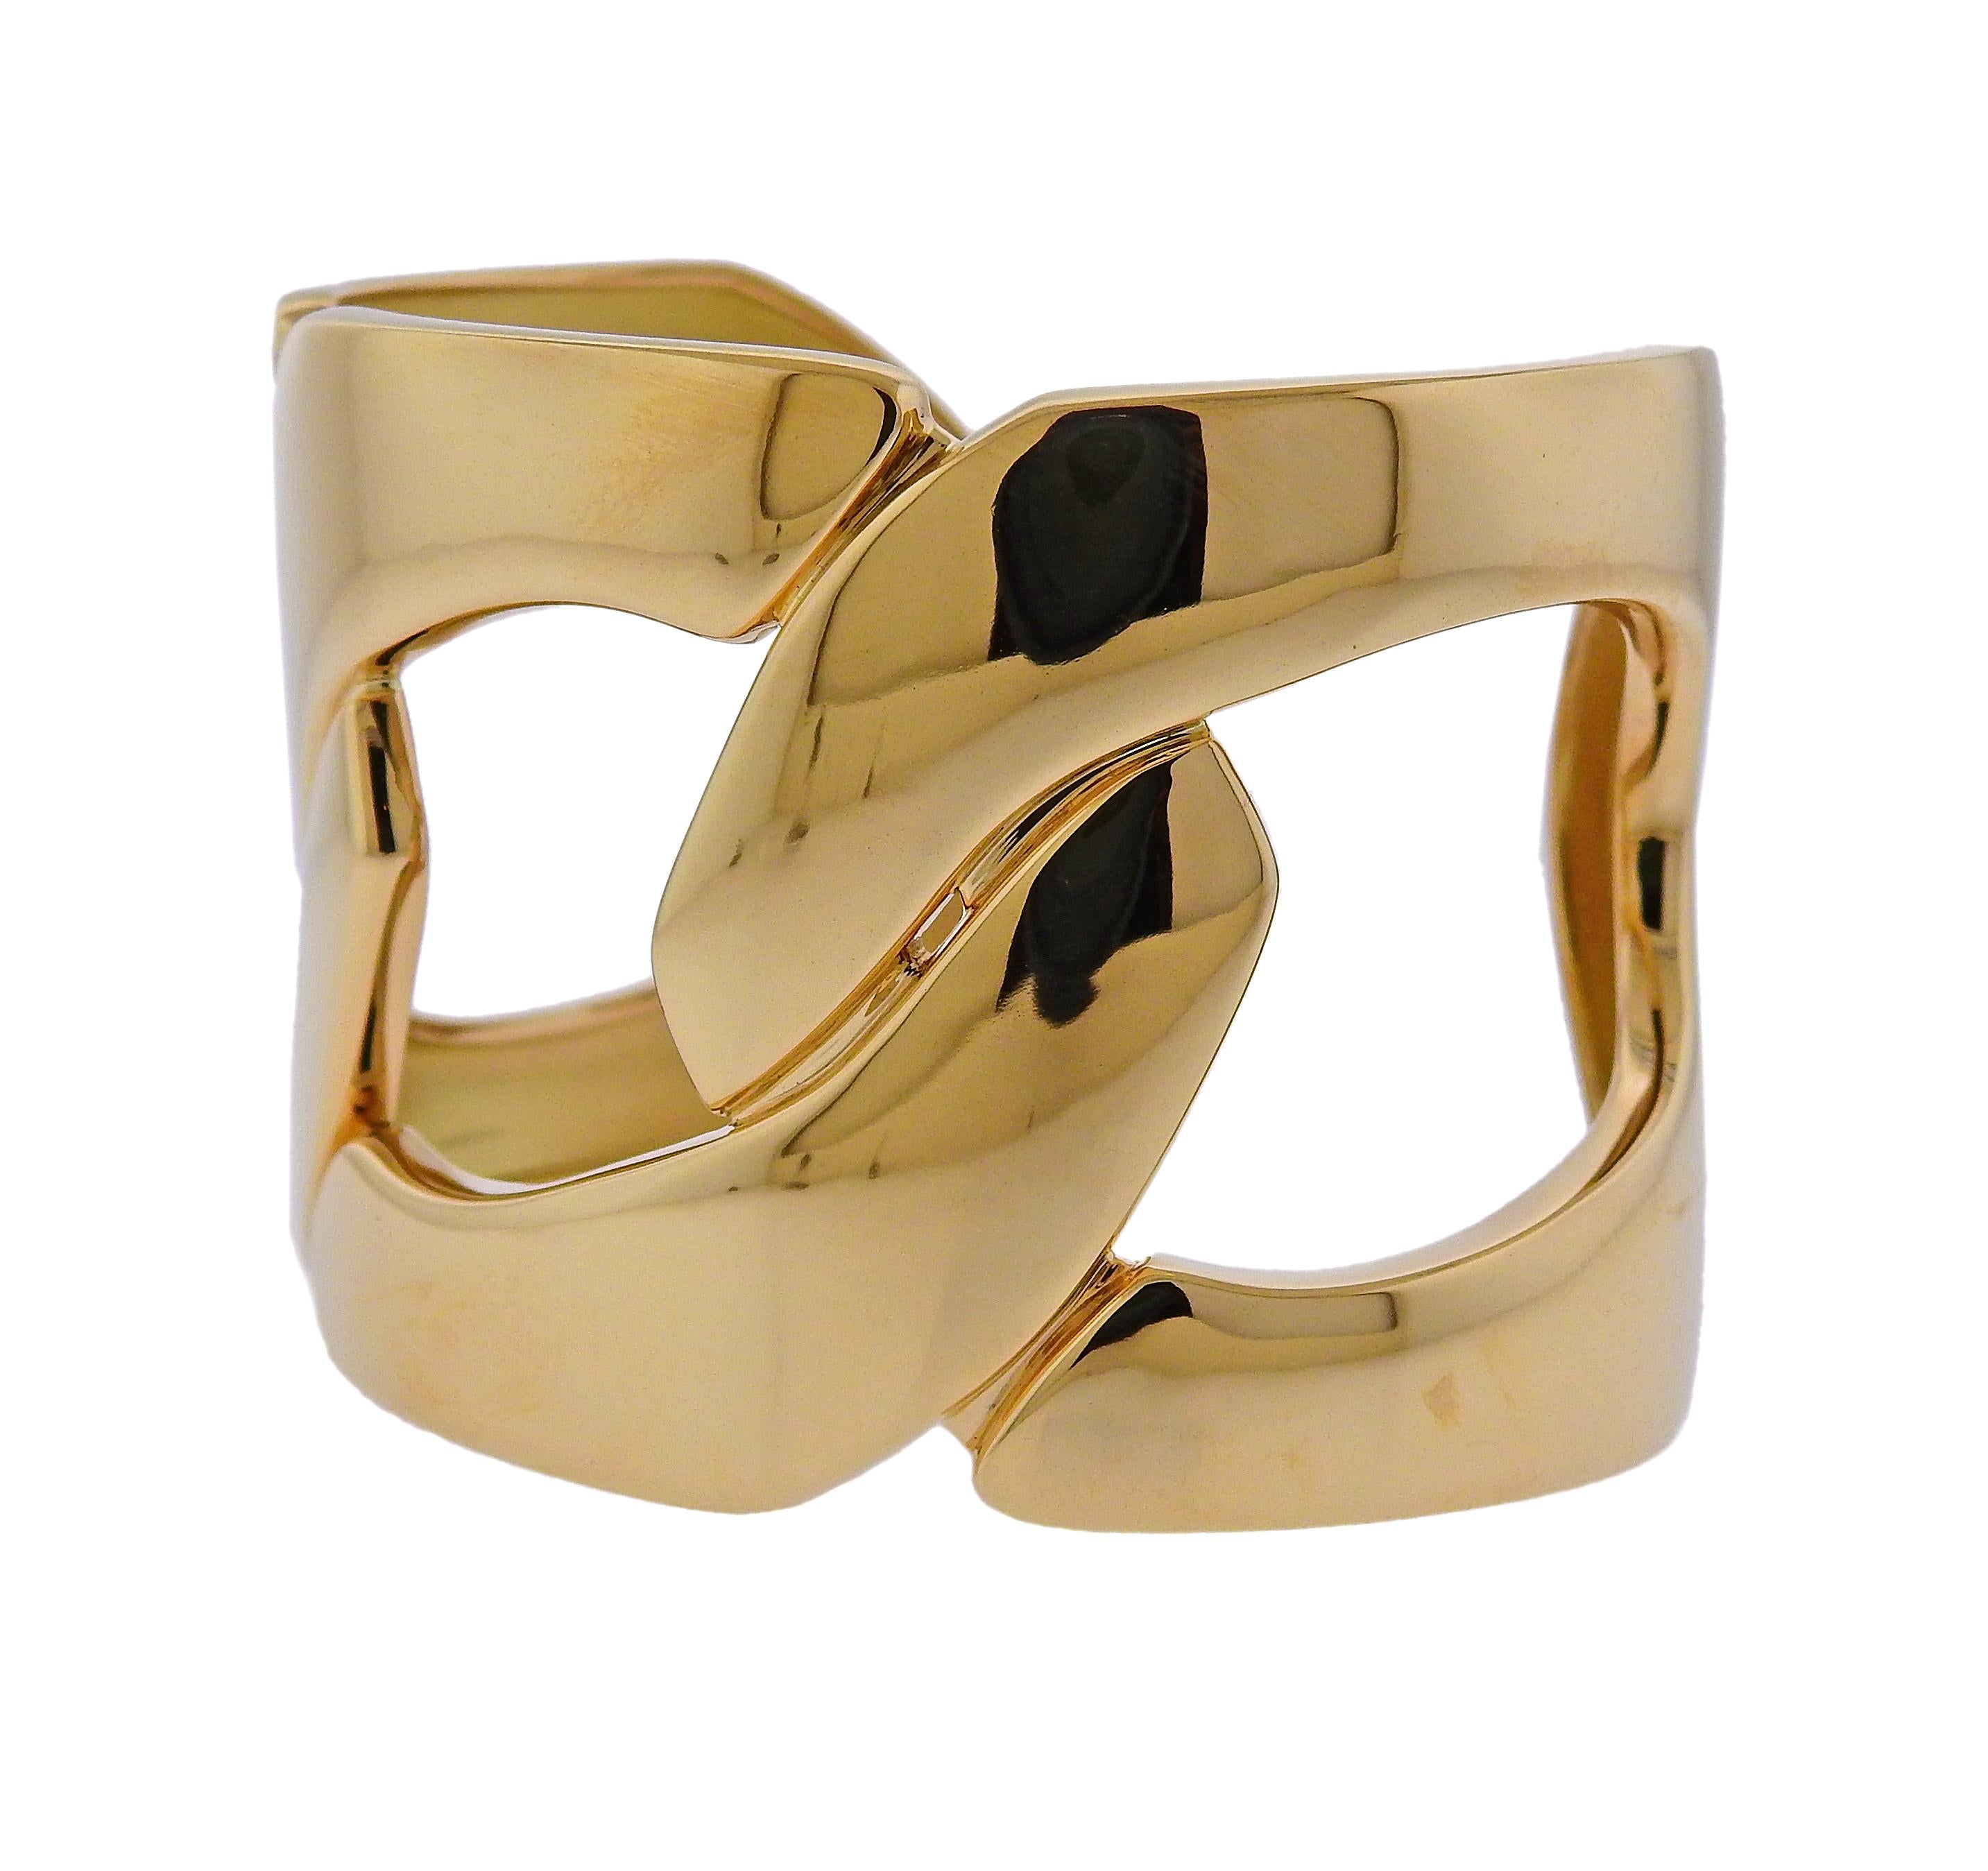 Brand new 18k yellow gold wide cuff bracelet, designed by Seaman Schepps, featuring three interconnected links. Bracelet will fit approx. 7